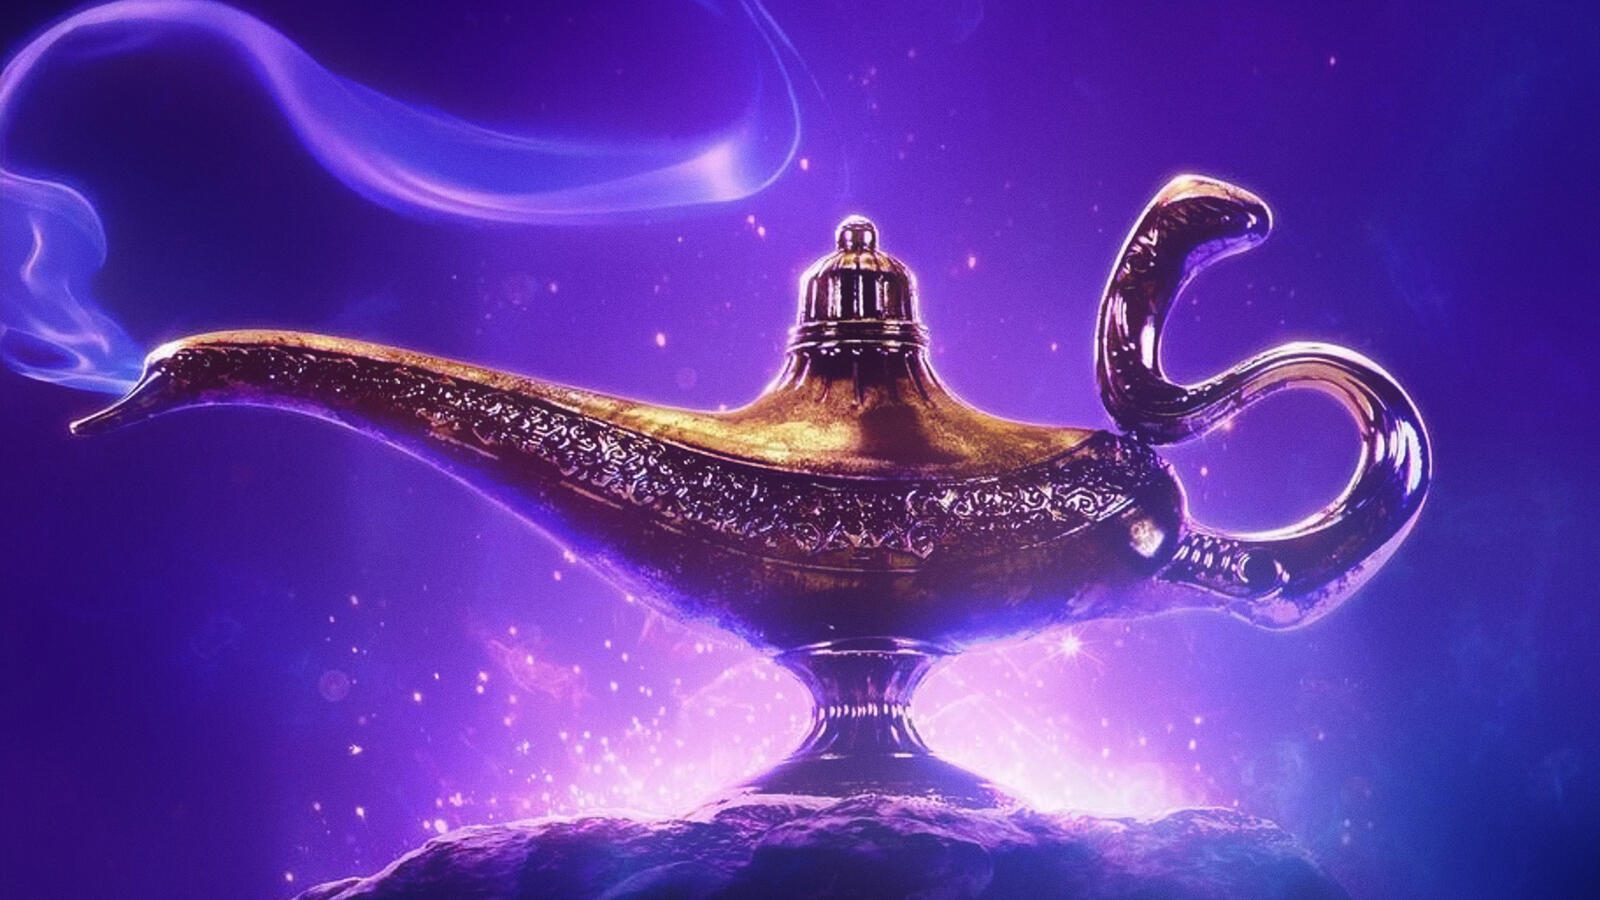 Wallpapers lamp movies aladdin on the desktop